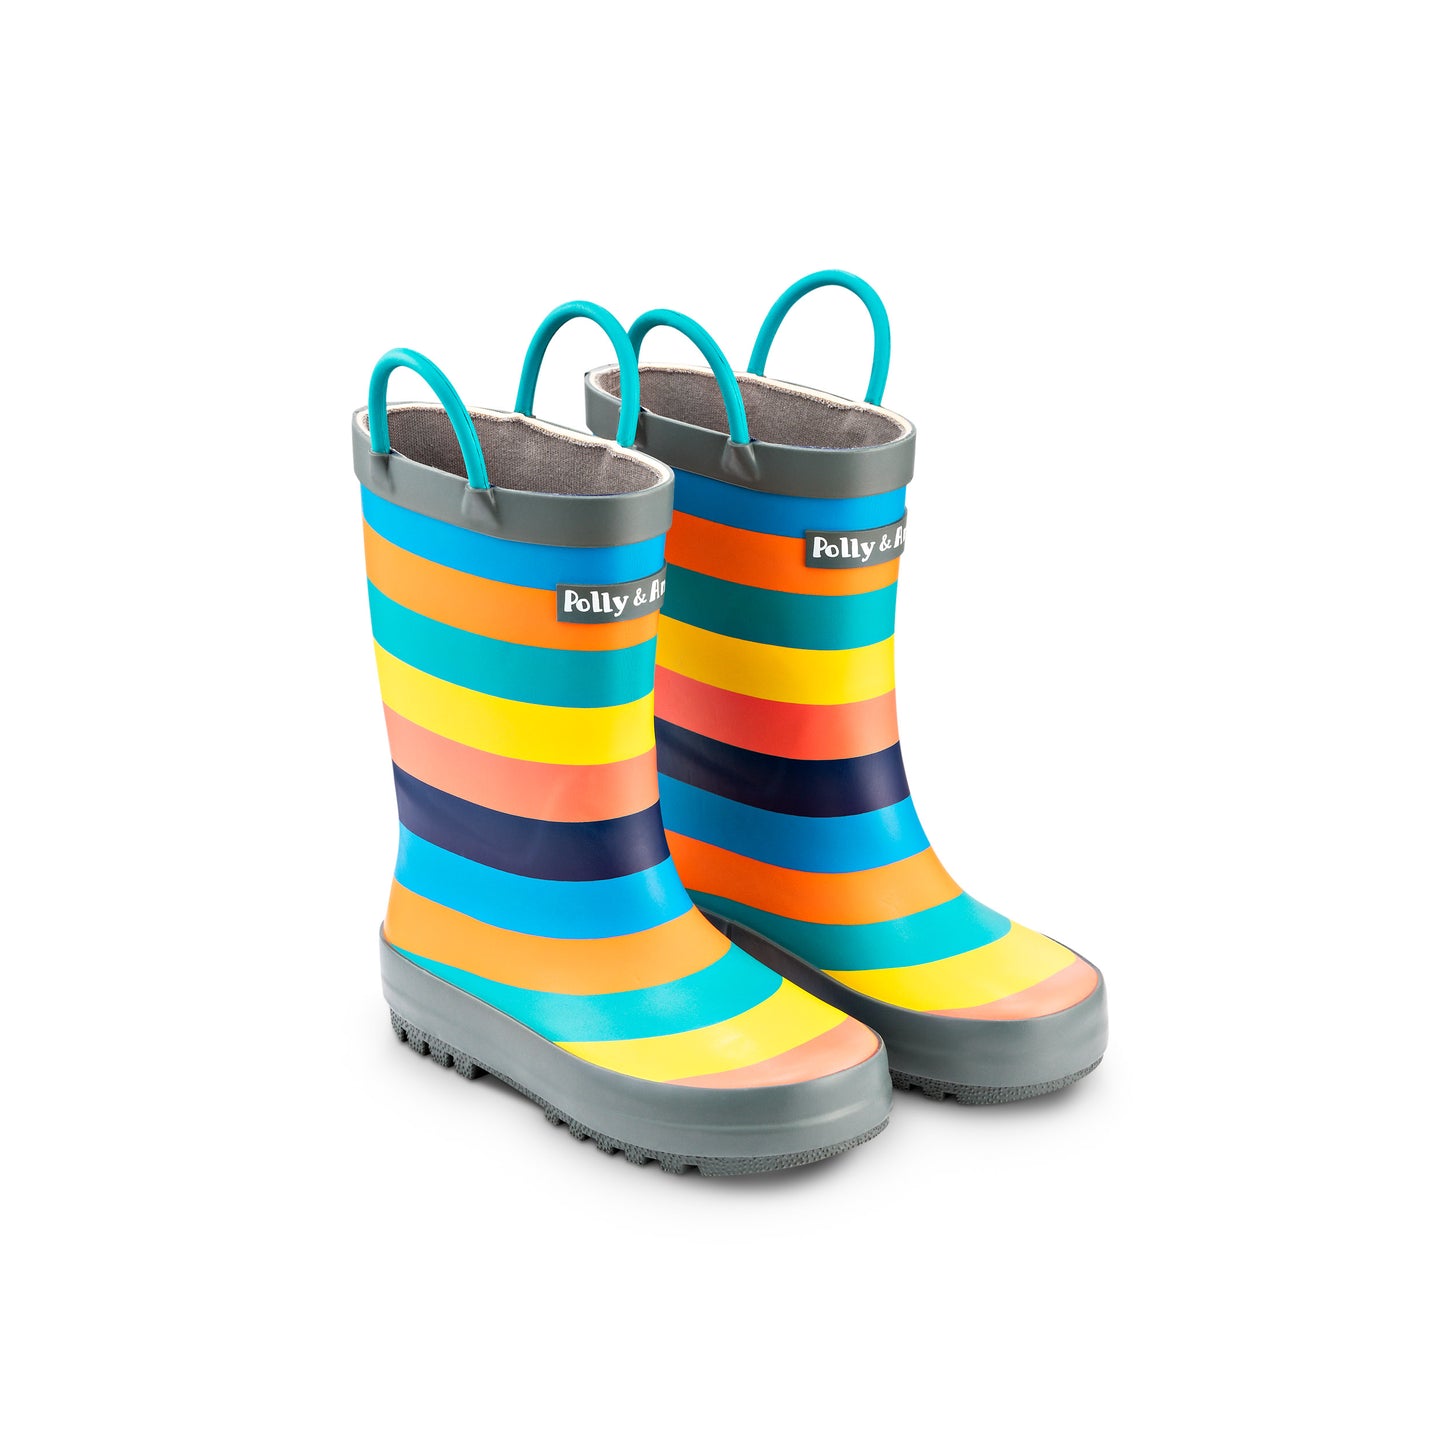 Order now to get your Sustainable Rainboots which Includes FREE shipping AND a free pair of rainbow knee high bamboo socks for all of April!